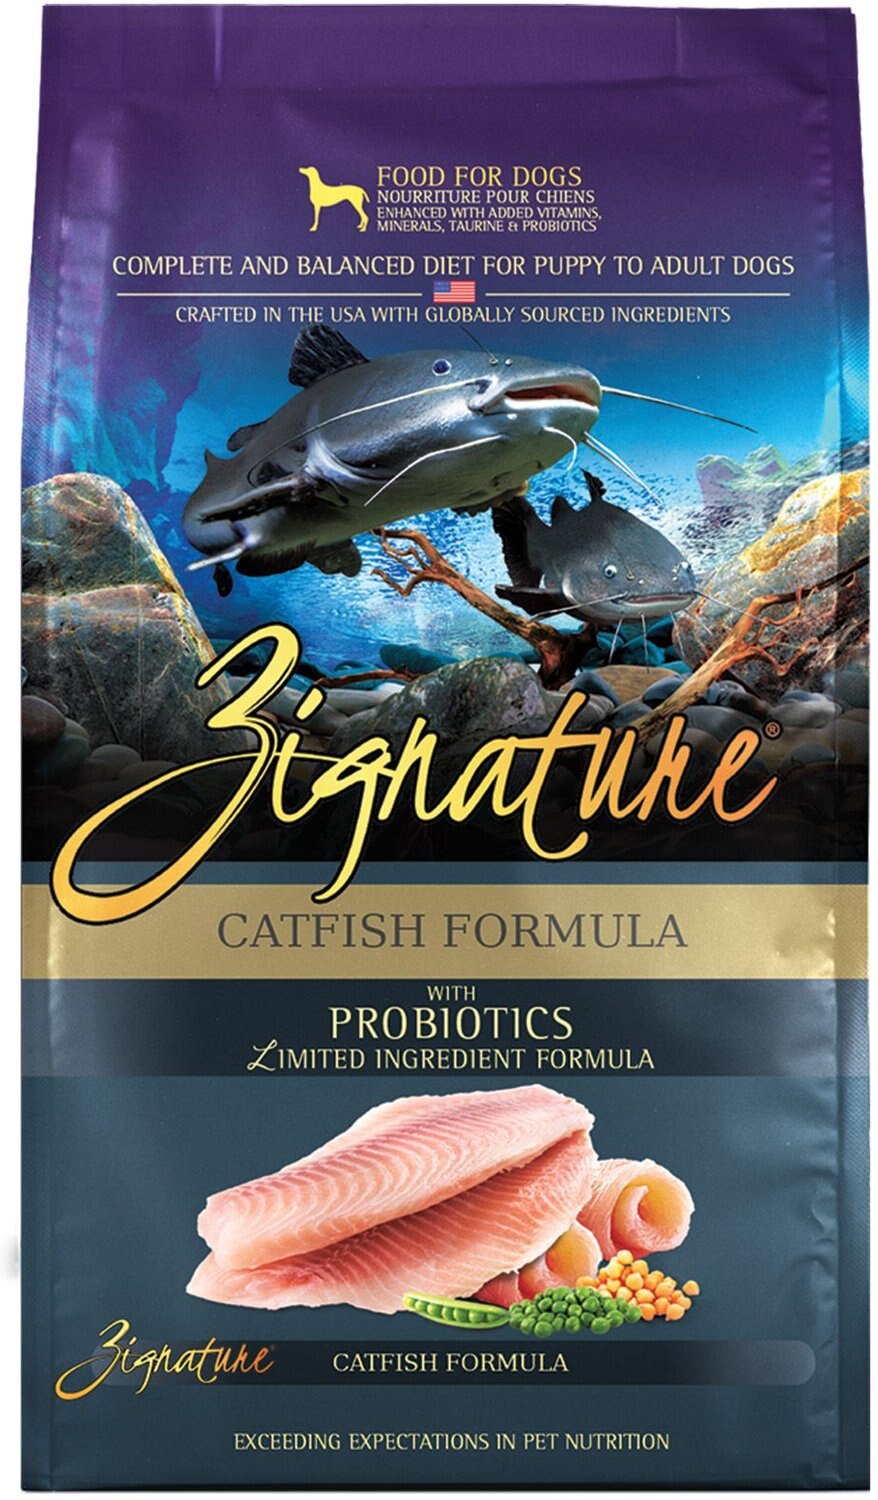 Catfish Dog Food For Dogs